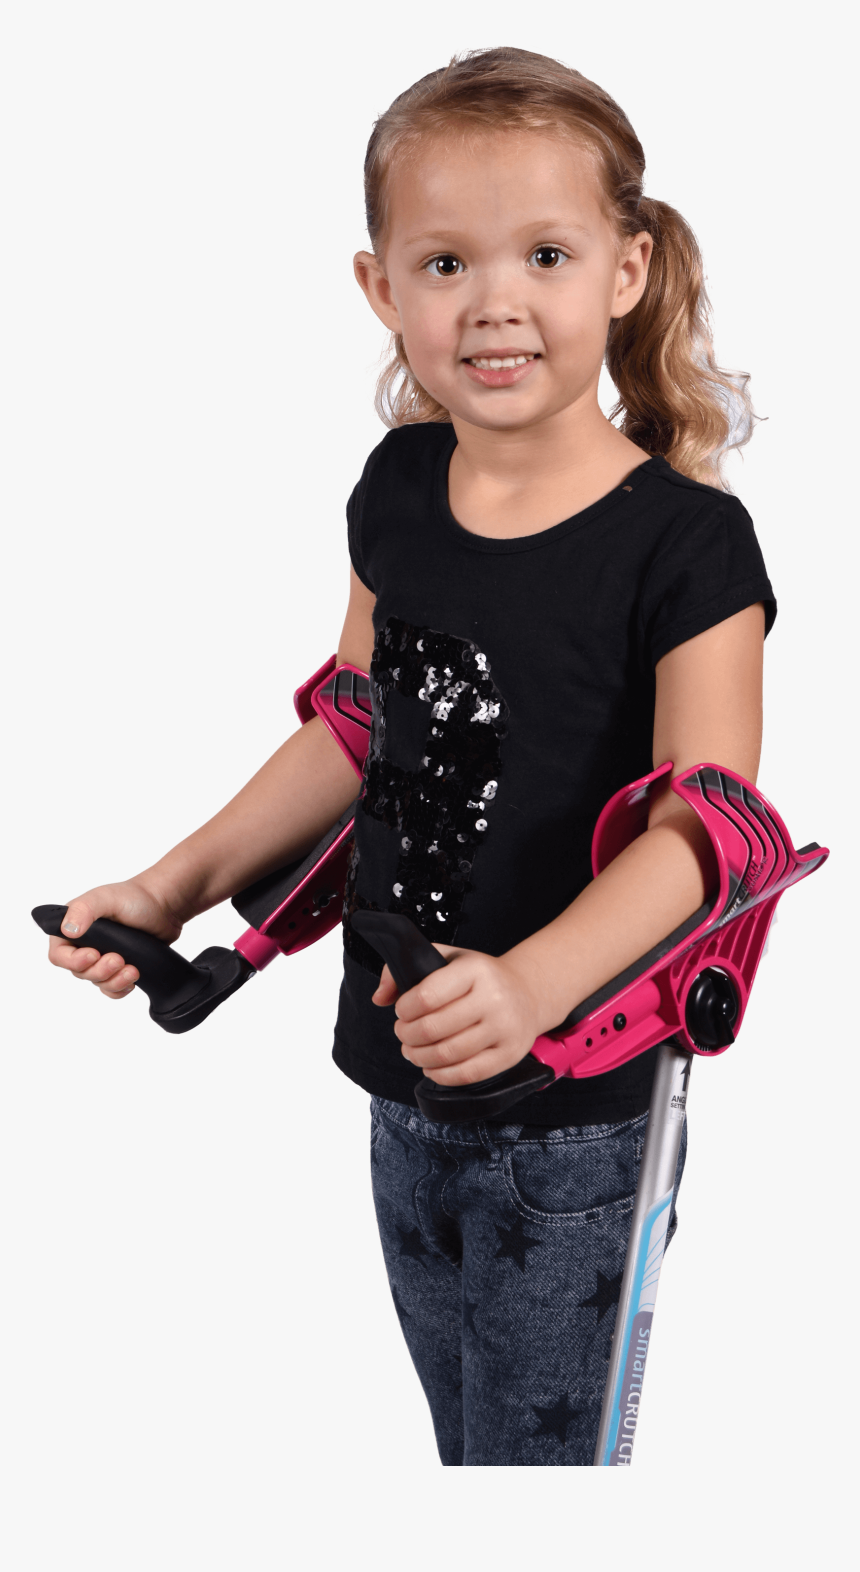 Little Girl With Smartcrutch - Girl, HD Png Download, Free Download